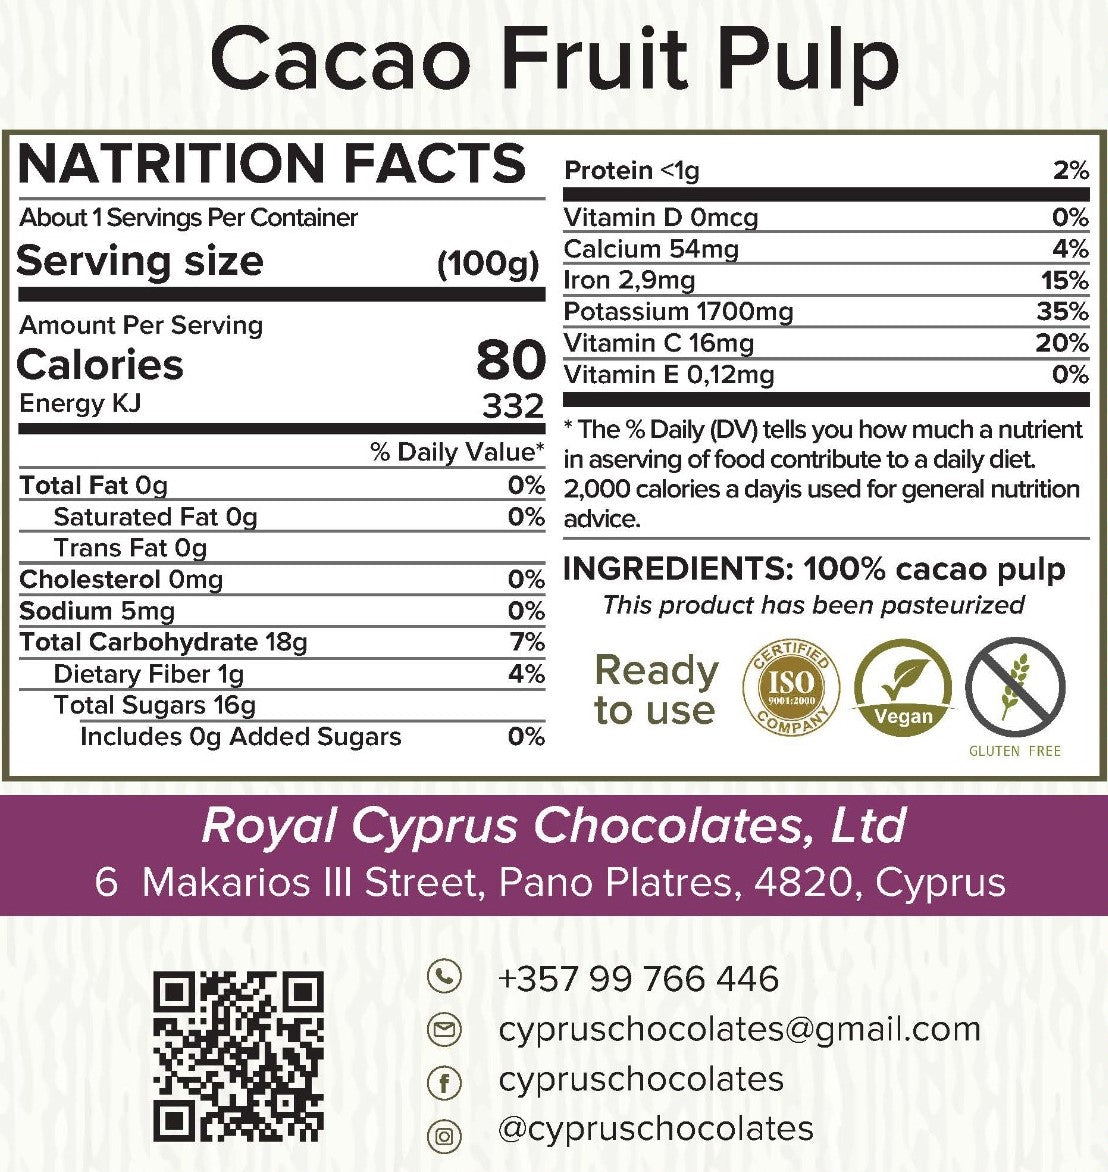 Cacao Fruit Pulp